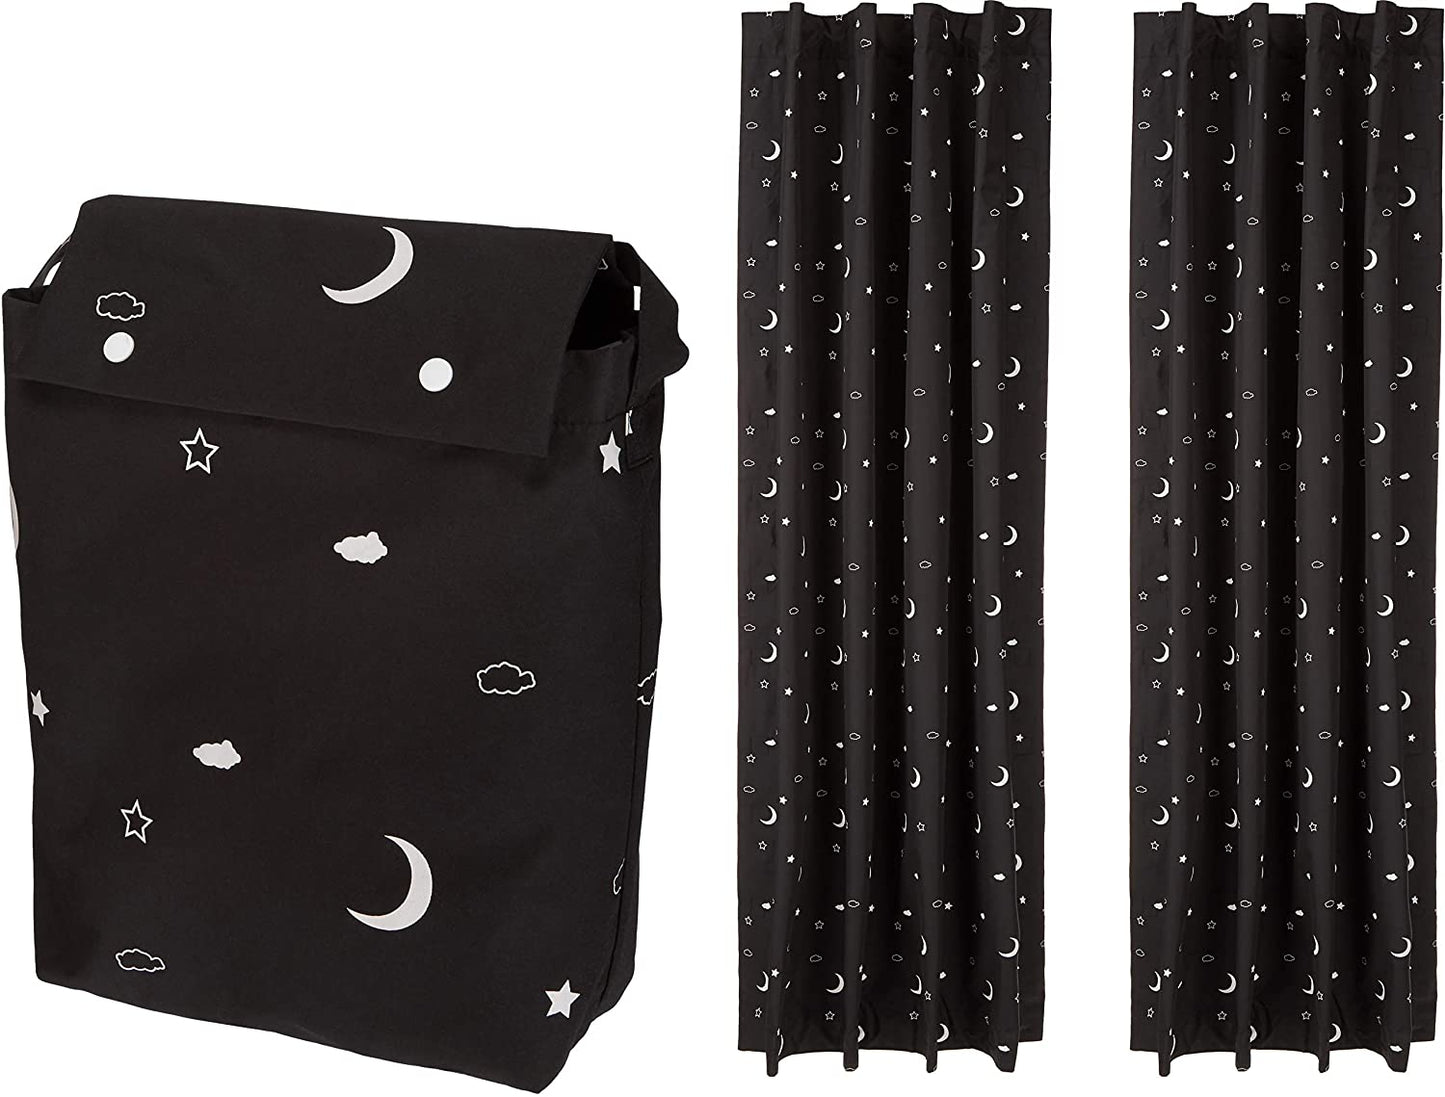 Amazon Basics Portable Window Blackout Curtain Shade with Suction Cups for Travel, 2-Pack, 78"L X 50"W, Black  Amazon Basics Moon And Stars 2-Pack 